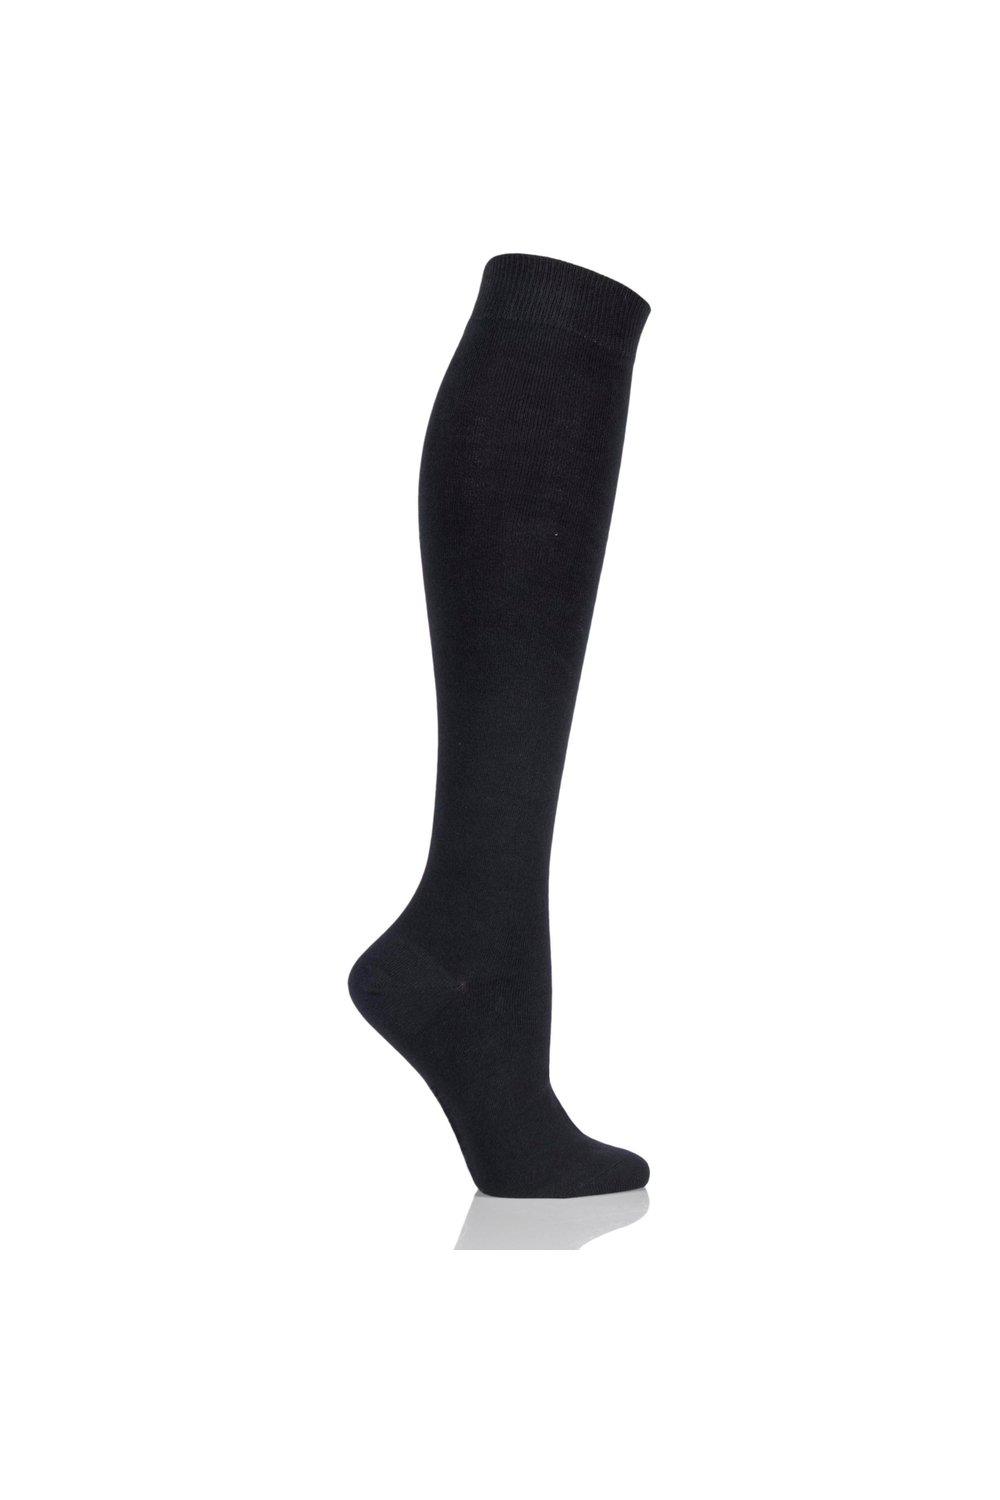 1 Pair Plain Bamboo Knee High Socks with Comfort Cuff and Smooth Toe Seams